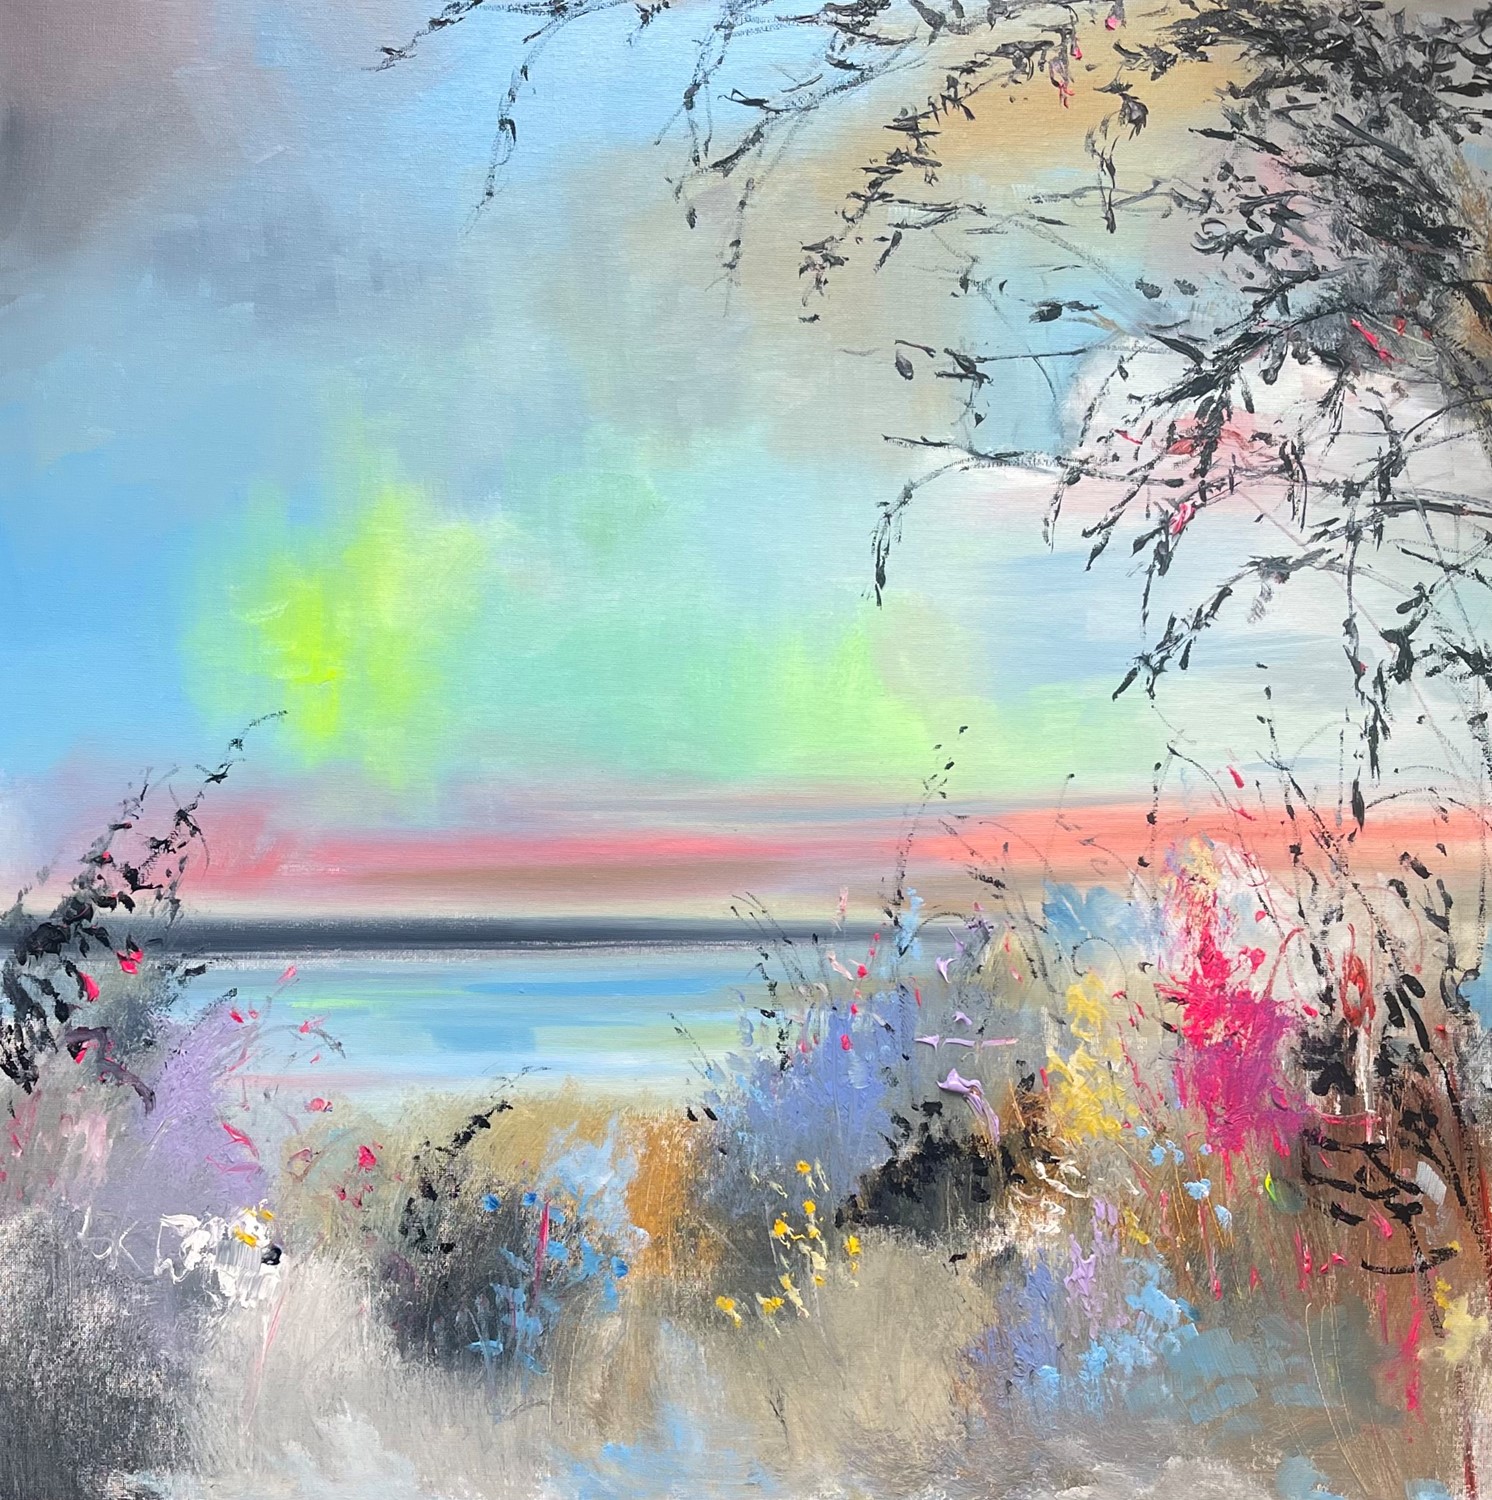 'A touch of magic in the sky ' by artist Rosanne Barr